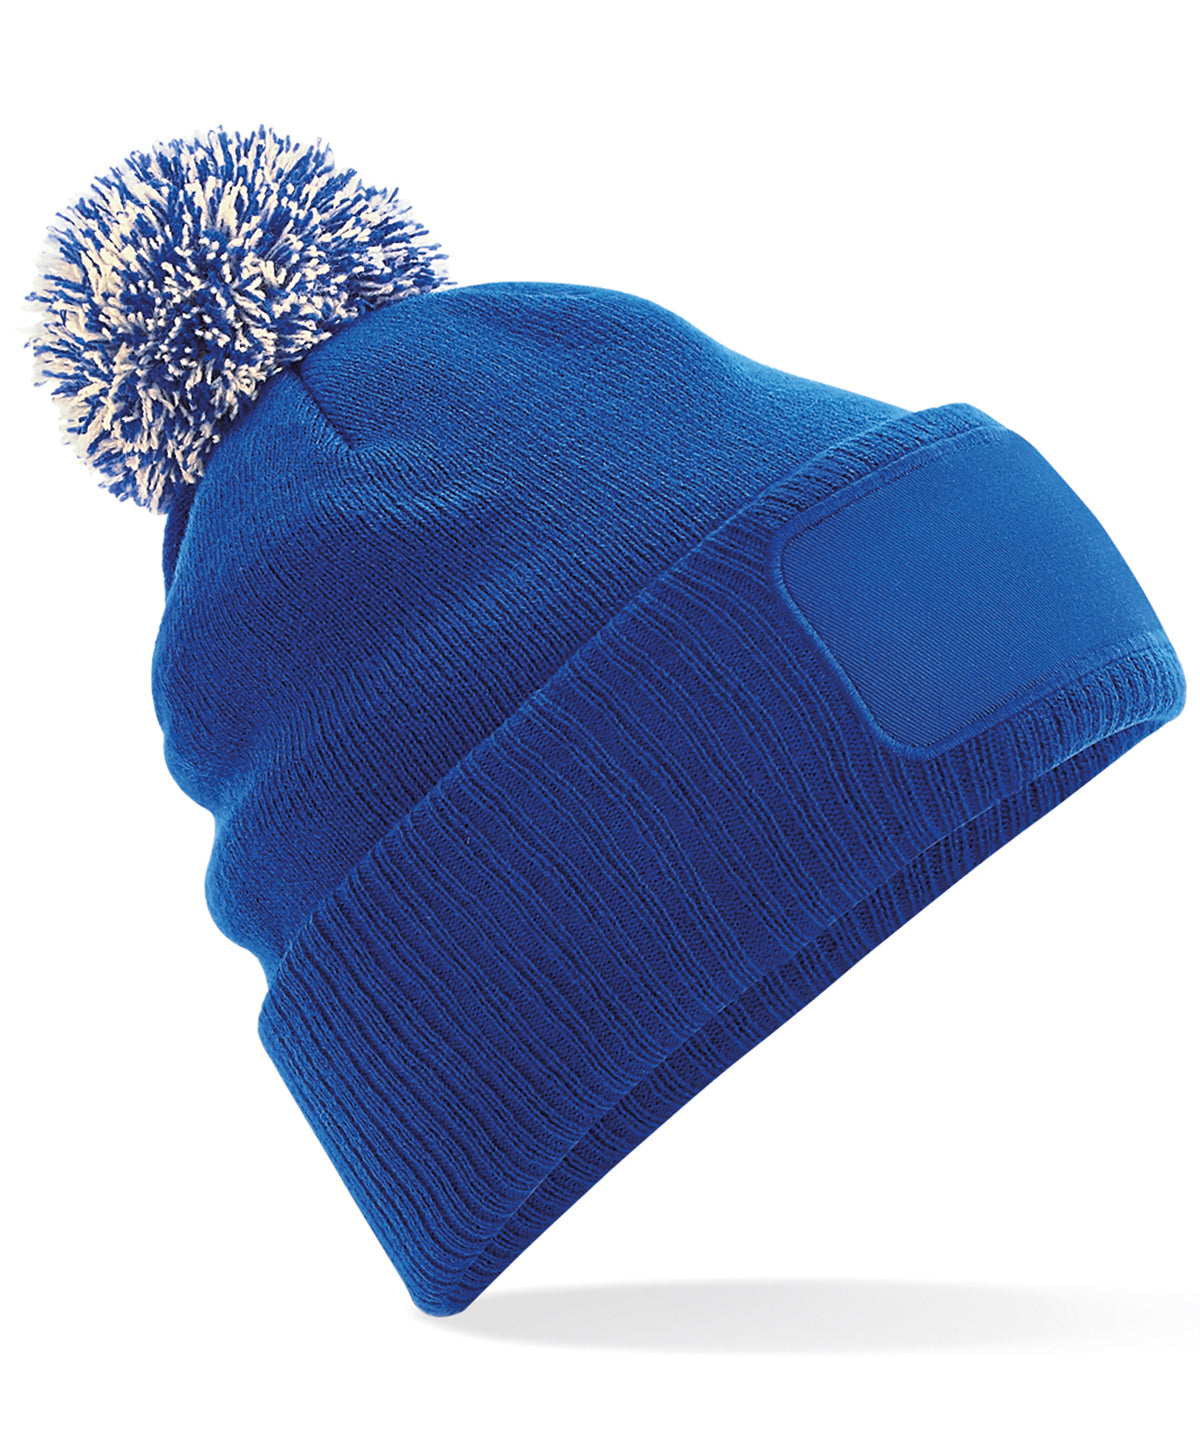 Personalised Hats - Royal Beechfield Snowstar® patch beanie